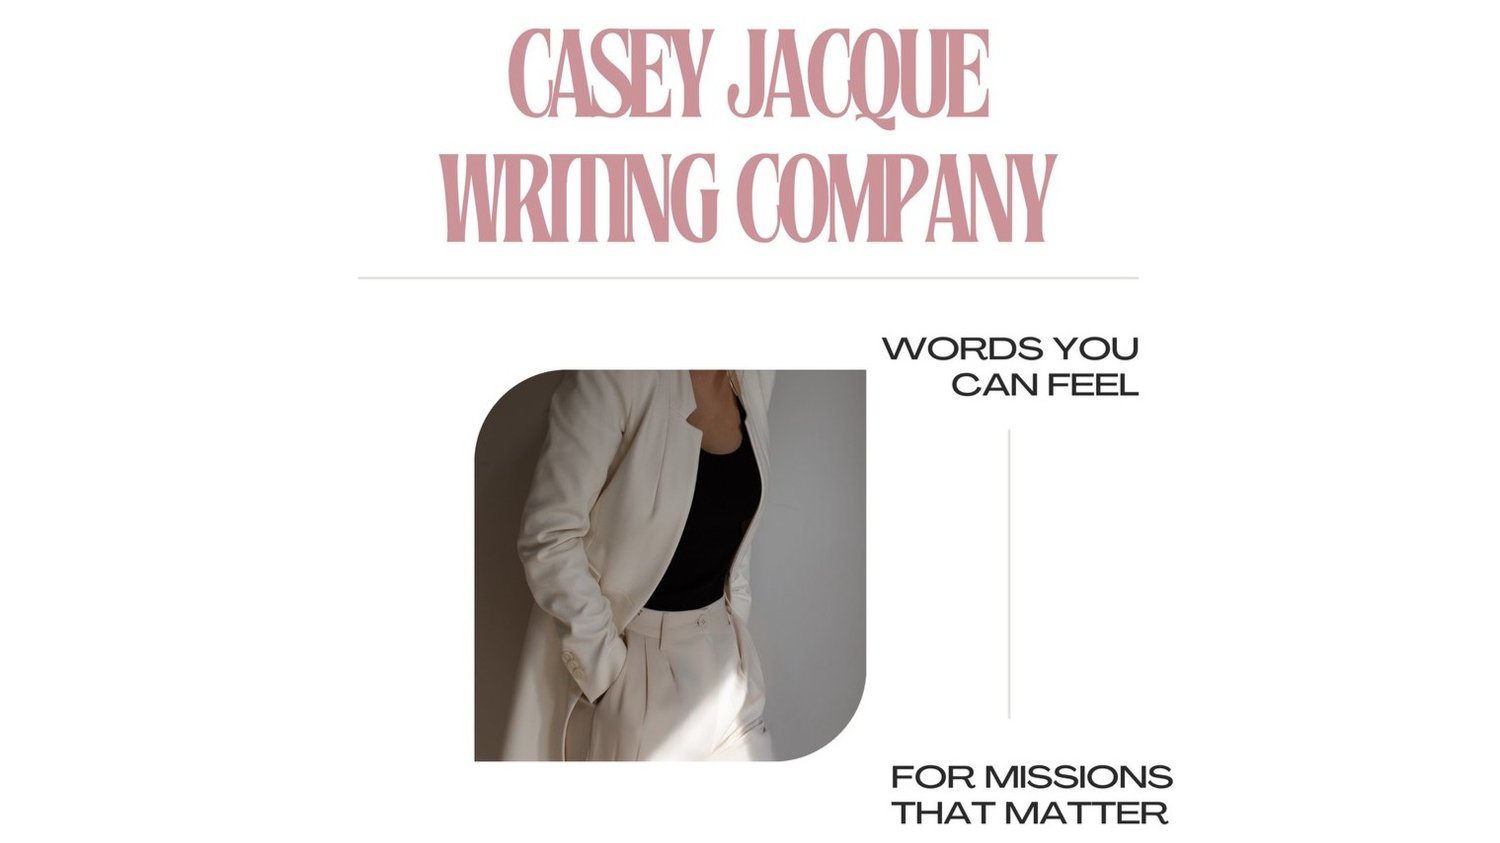 Casey Jacque: A Trusted Resource for The Vital Creatives in the Creative Economy